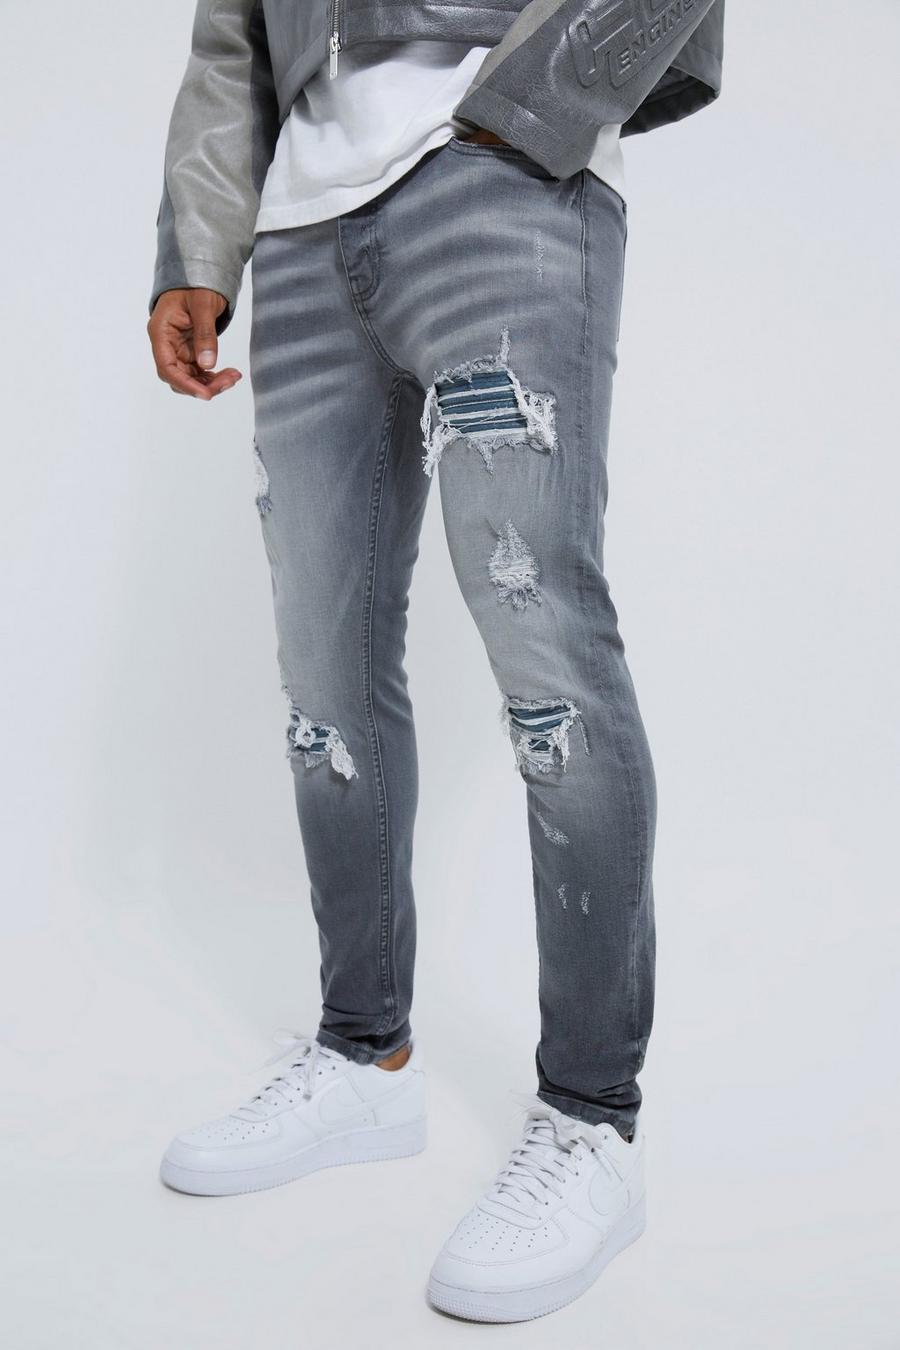 Men's Stretch Skinny Biker Jeans with Ripped Holes - Comfy & Stylish